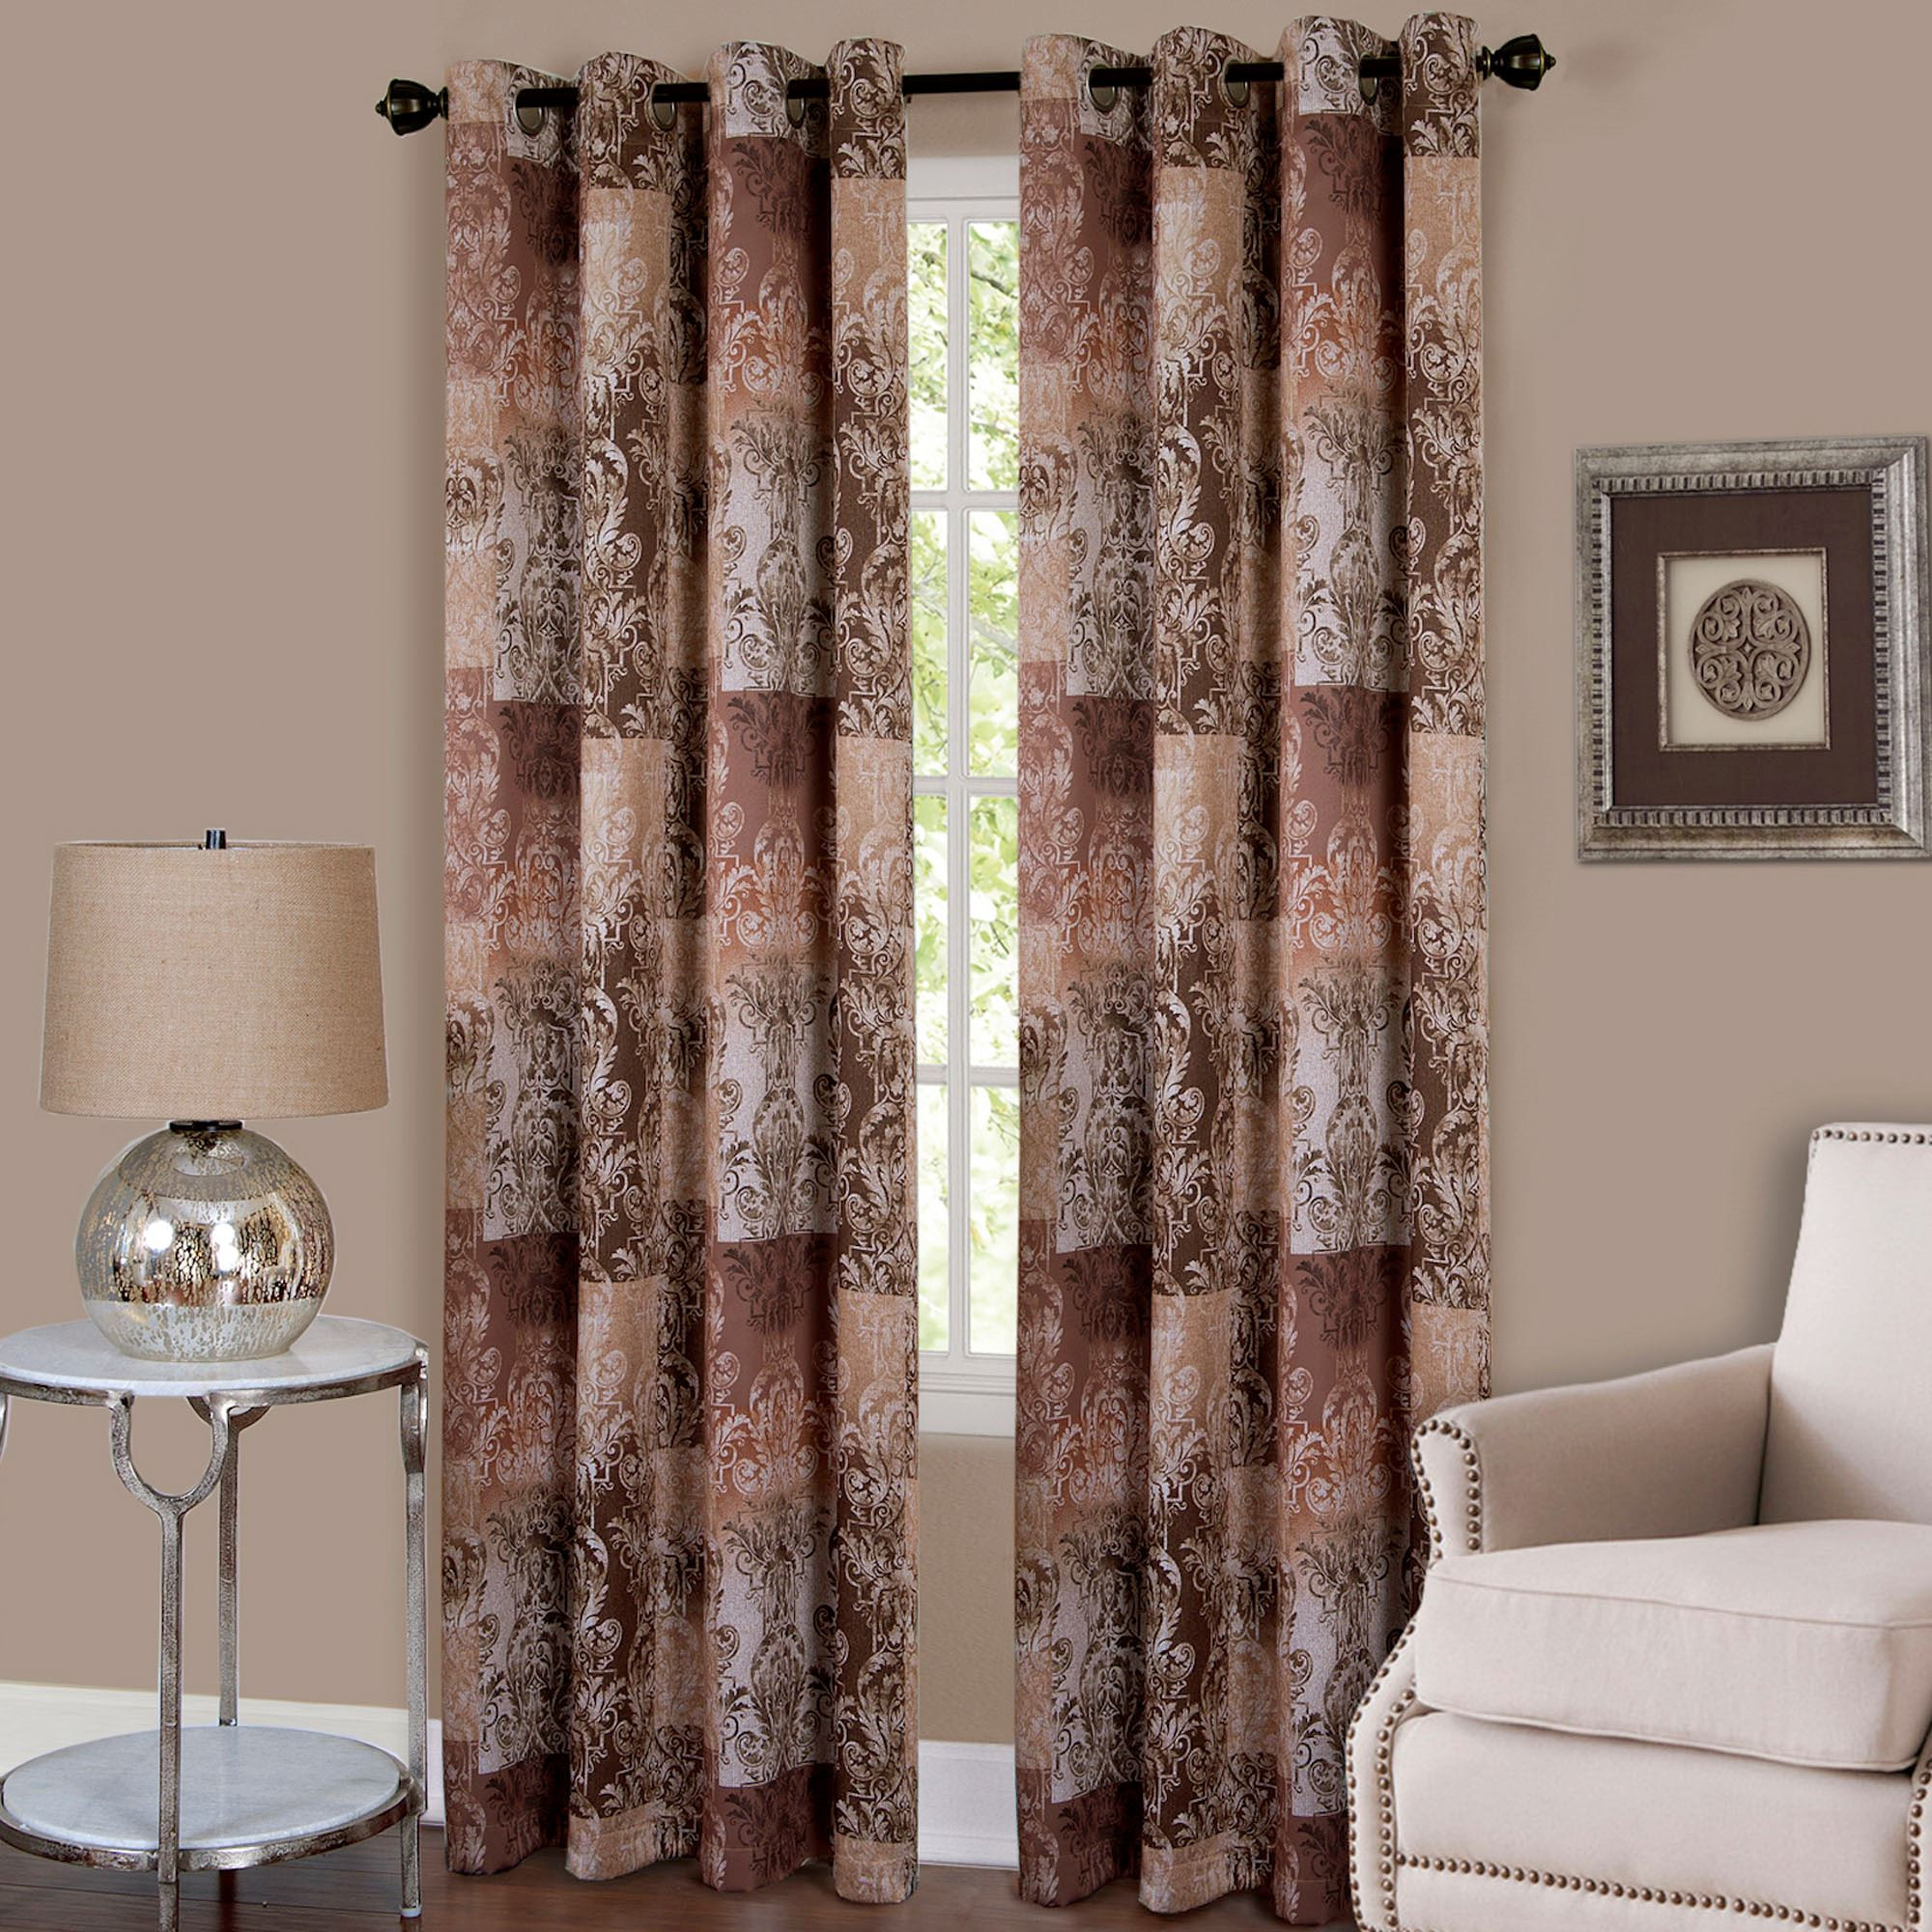 Jcpenney Living Room Curtains Inspirational Curtain Give Your Space A Relaxing And Tranquil Look With Of Jcpenney Living Room Curtains 